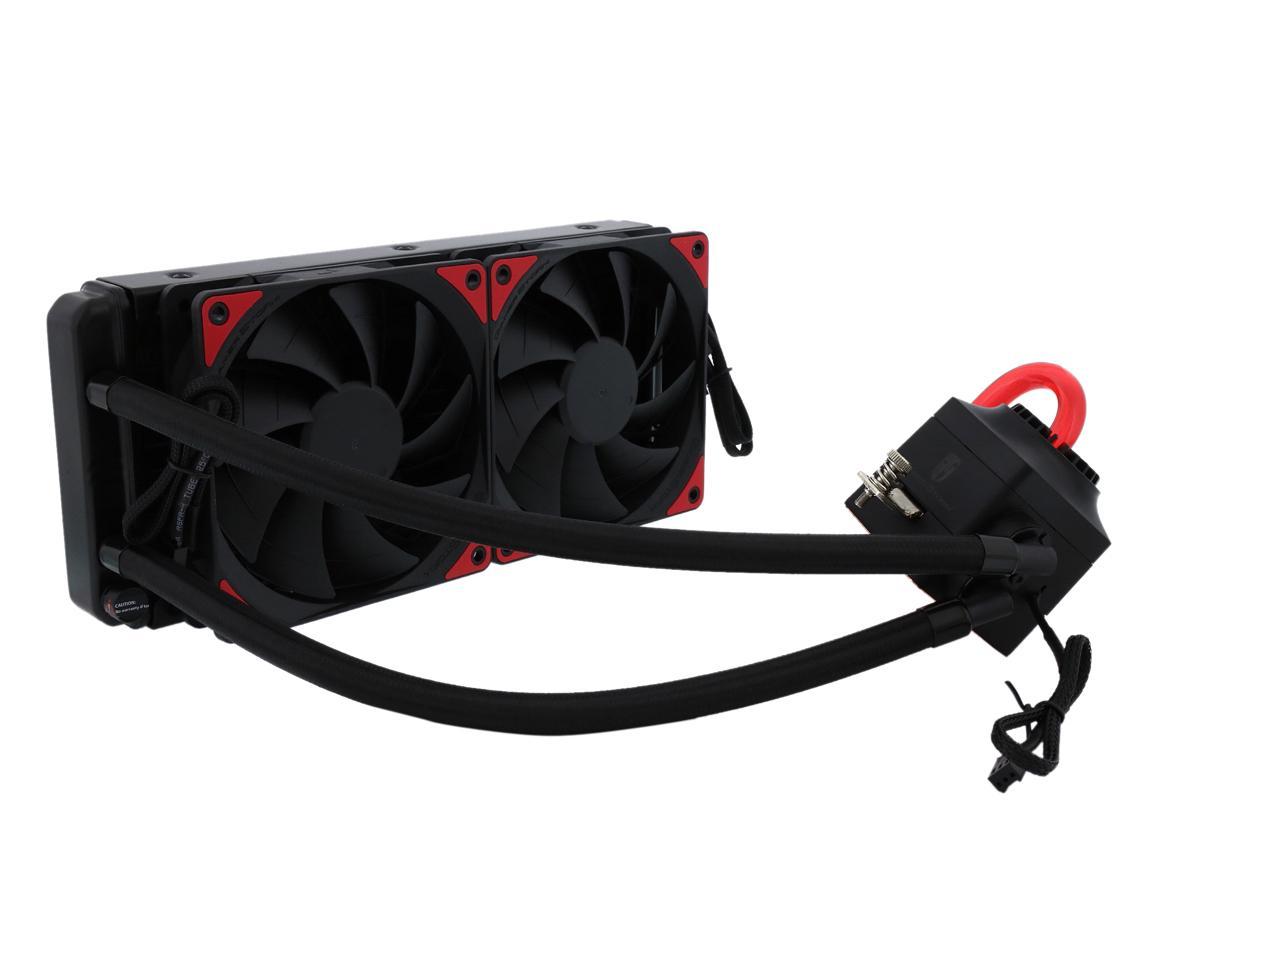 DEEPCOOL Gamer Storm CAPTAIN 240EX CPU Liquid Cooler AIO Water Cooling with 120mm PWM Fan